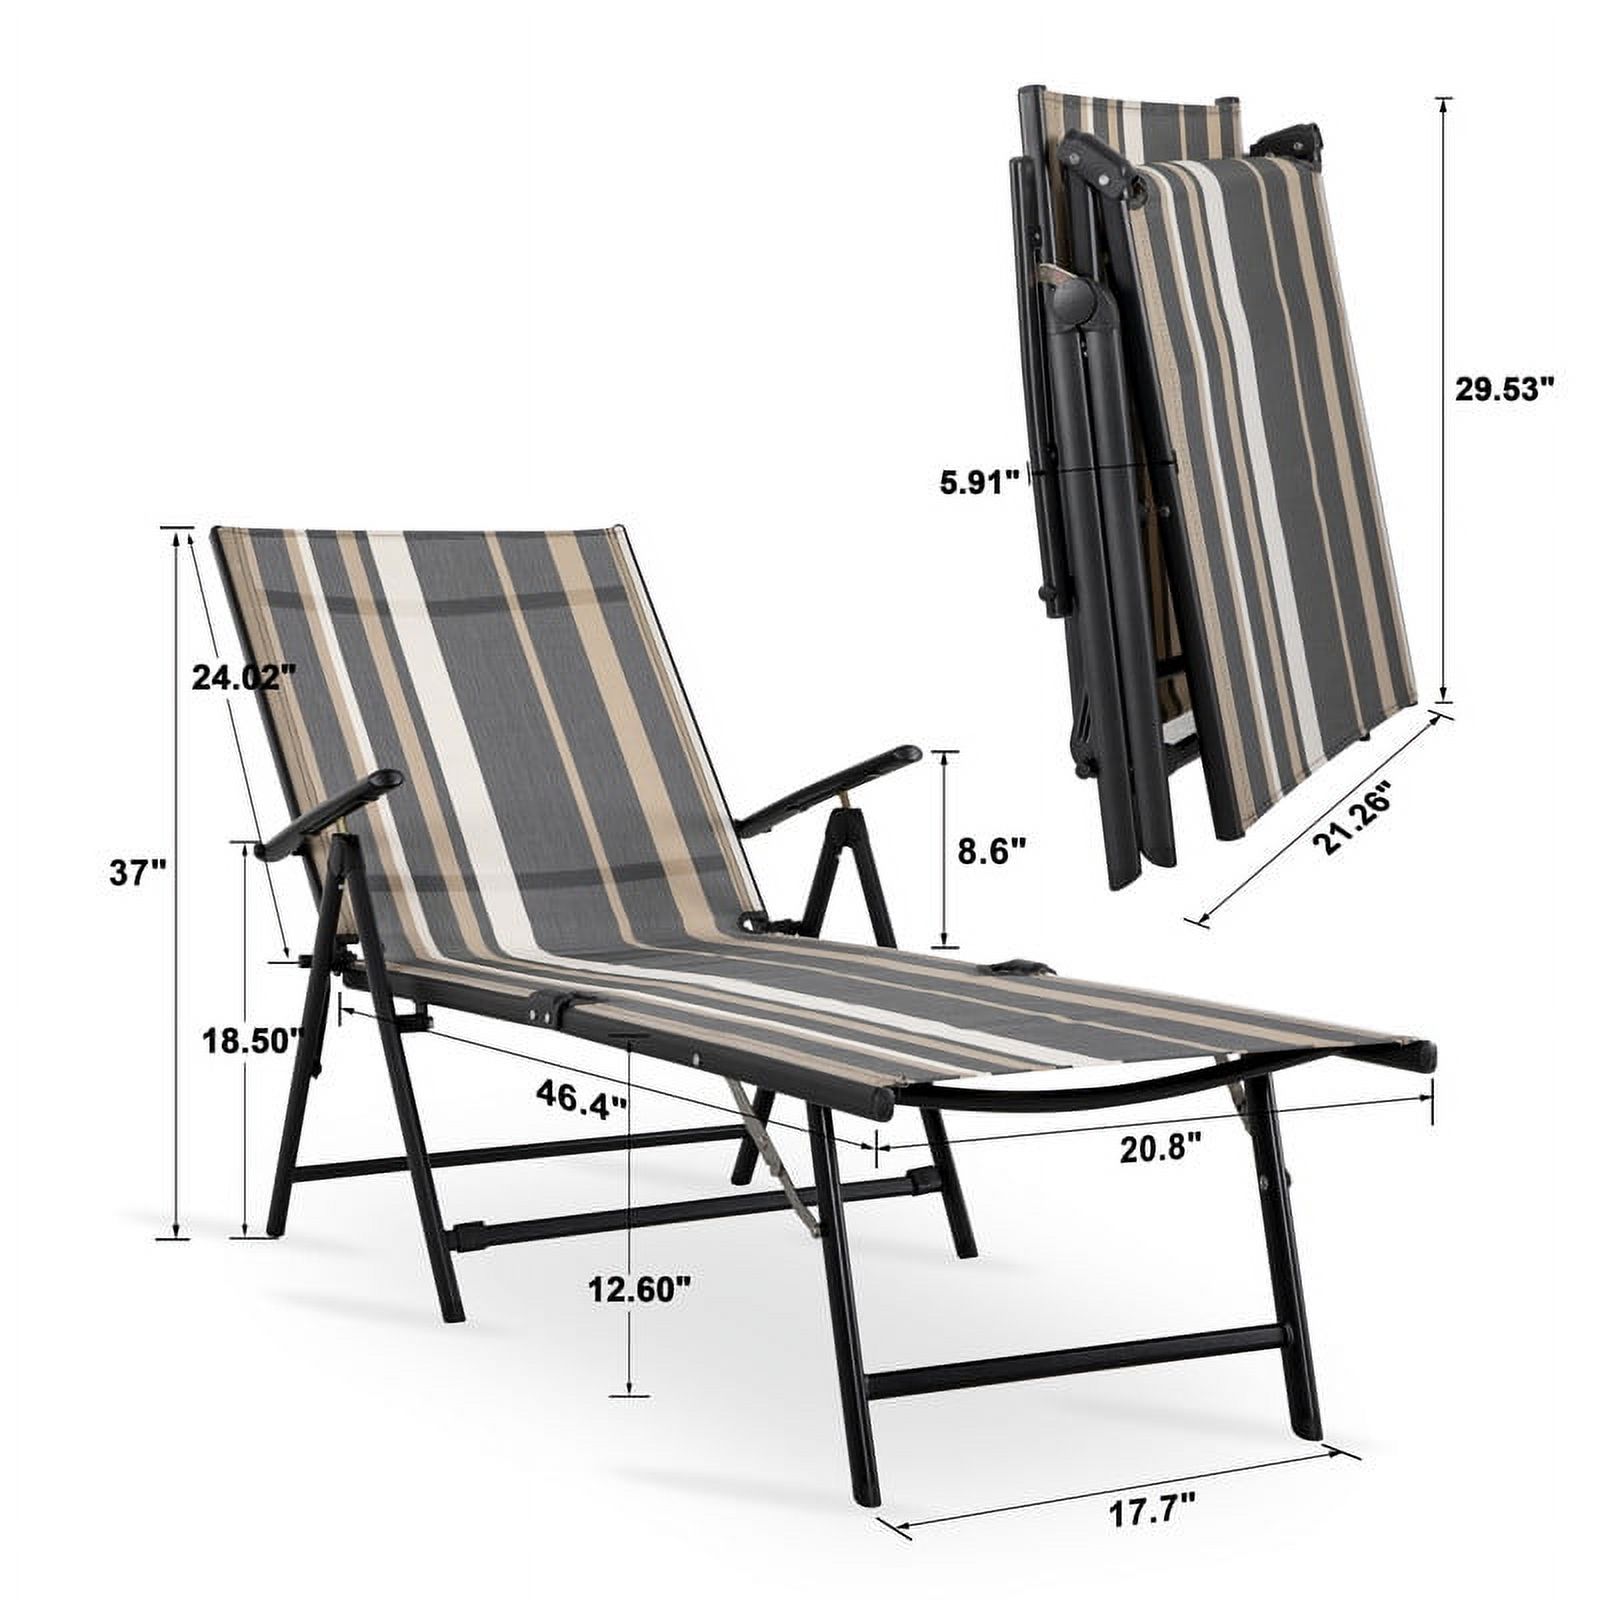 Nuu Garden Outdoor Patio Chaise Lounge Chair Adjustable Folding Pool Lounger w/ Steel Frame - Stripe - image 5 of 9